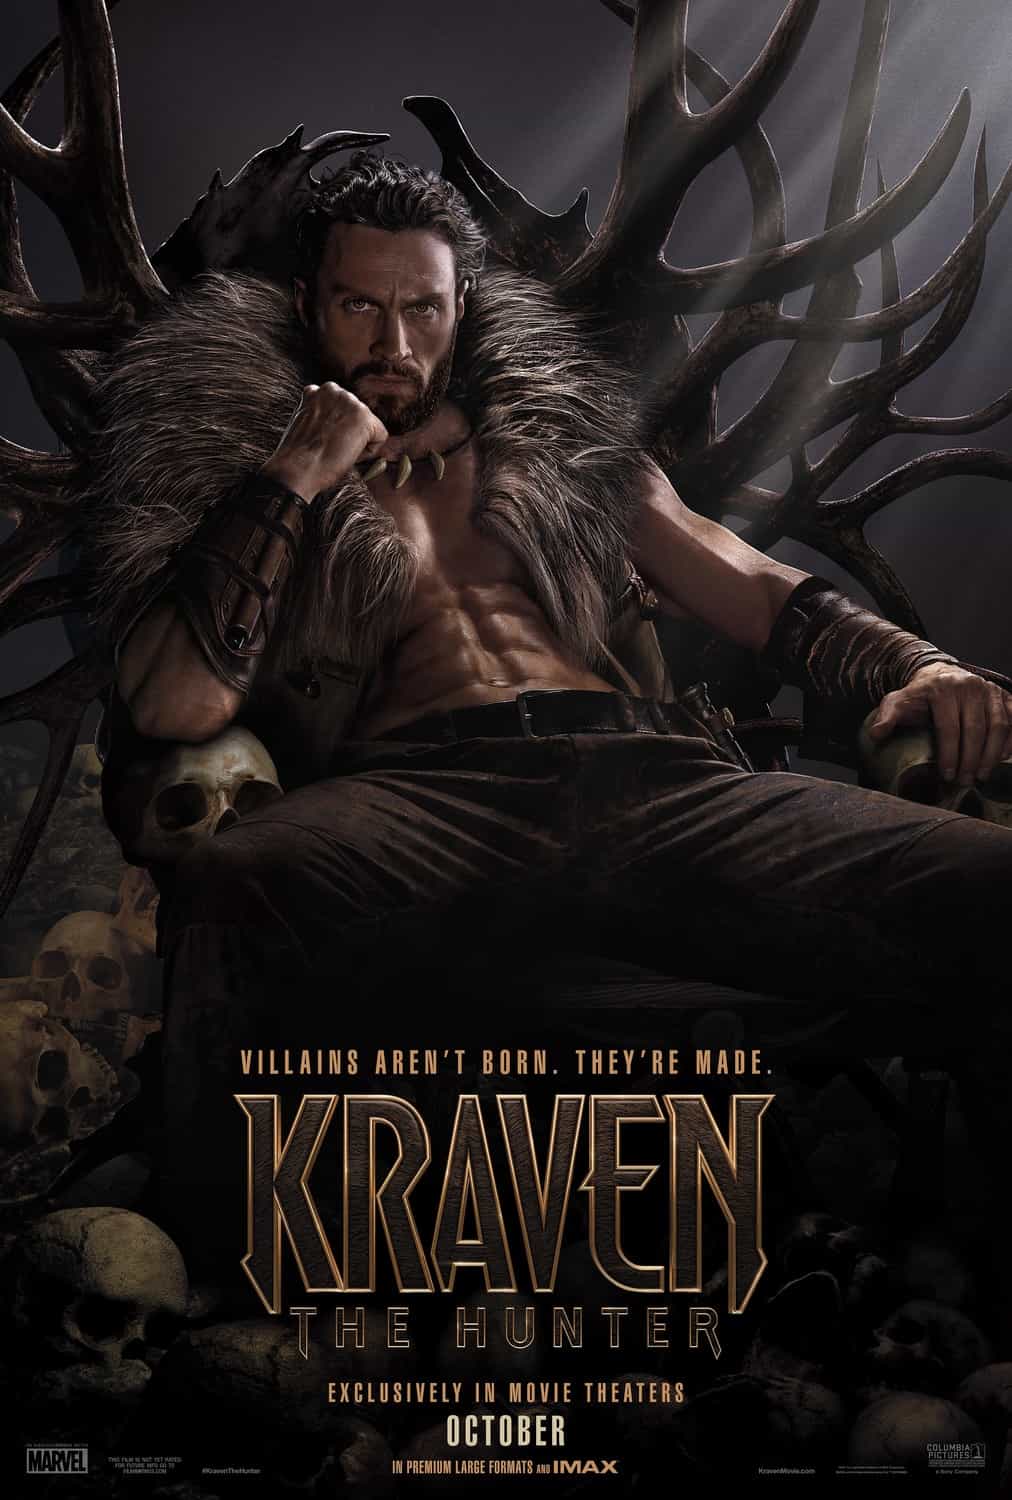 New poster has been released for Kraven the Hunter which stars Aaron Taylor-Johnson and Russell Crowe - movie UK release date 6th October 2023 #kraventhehunter